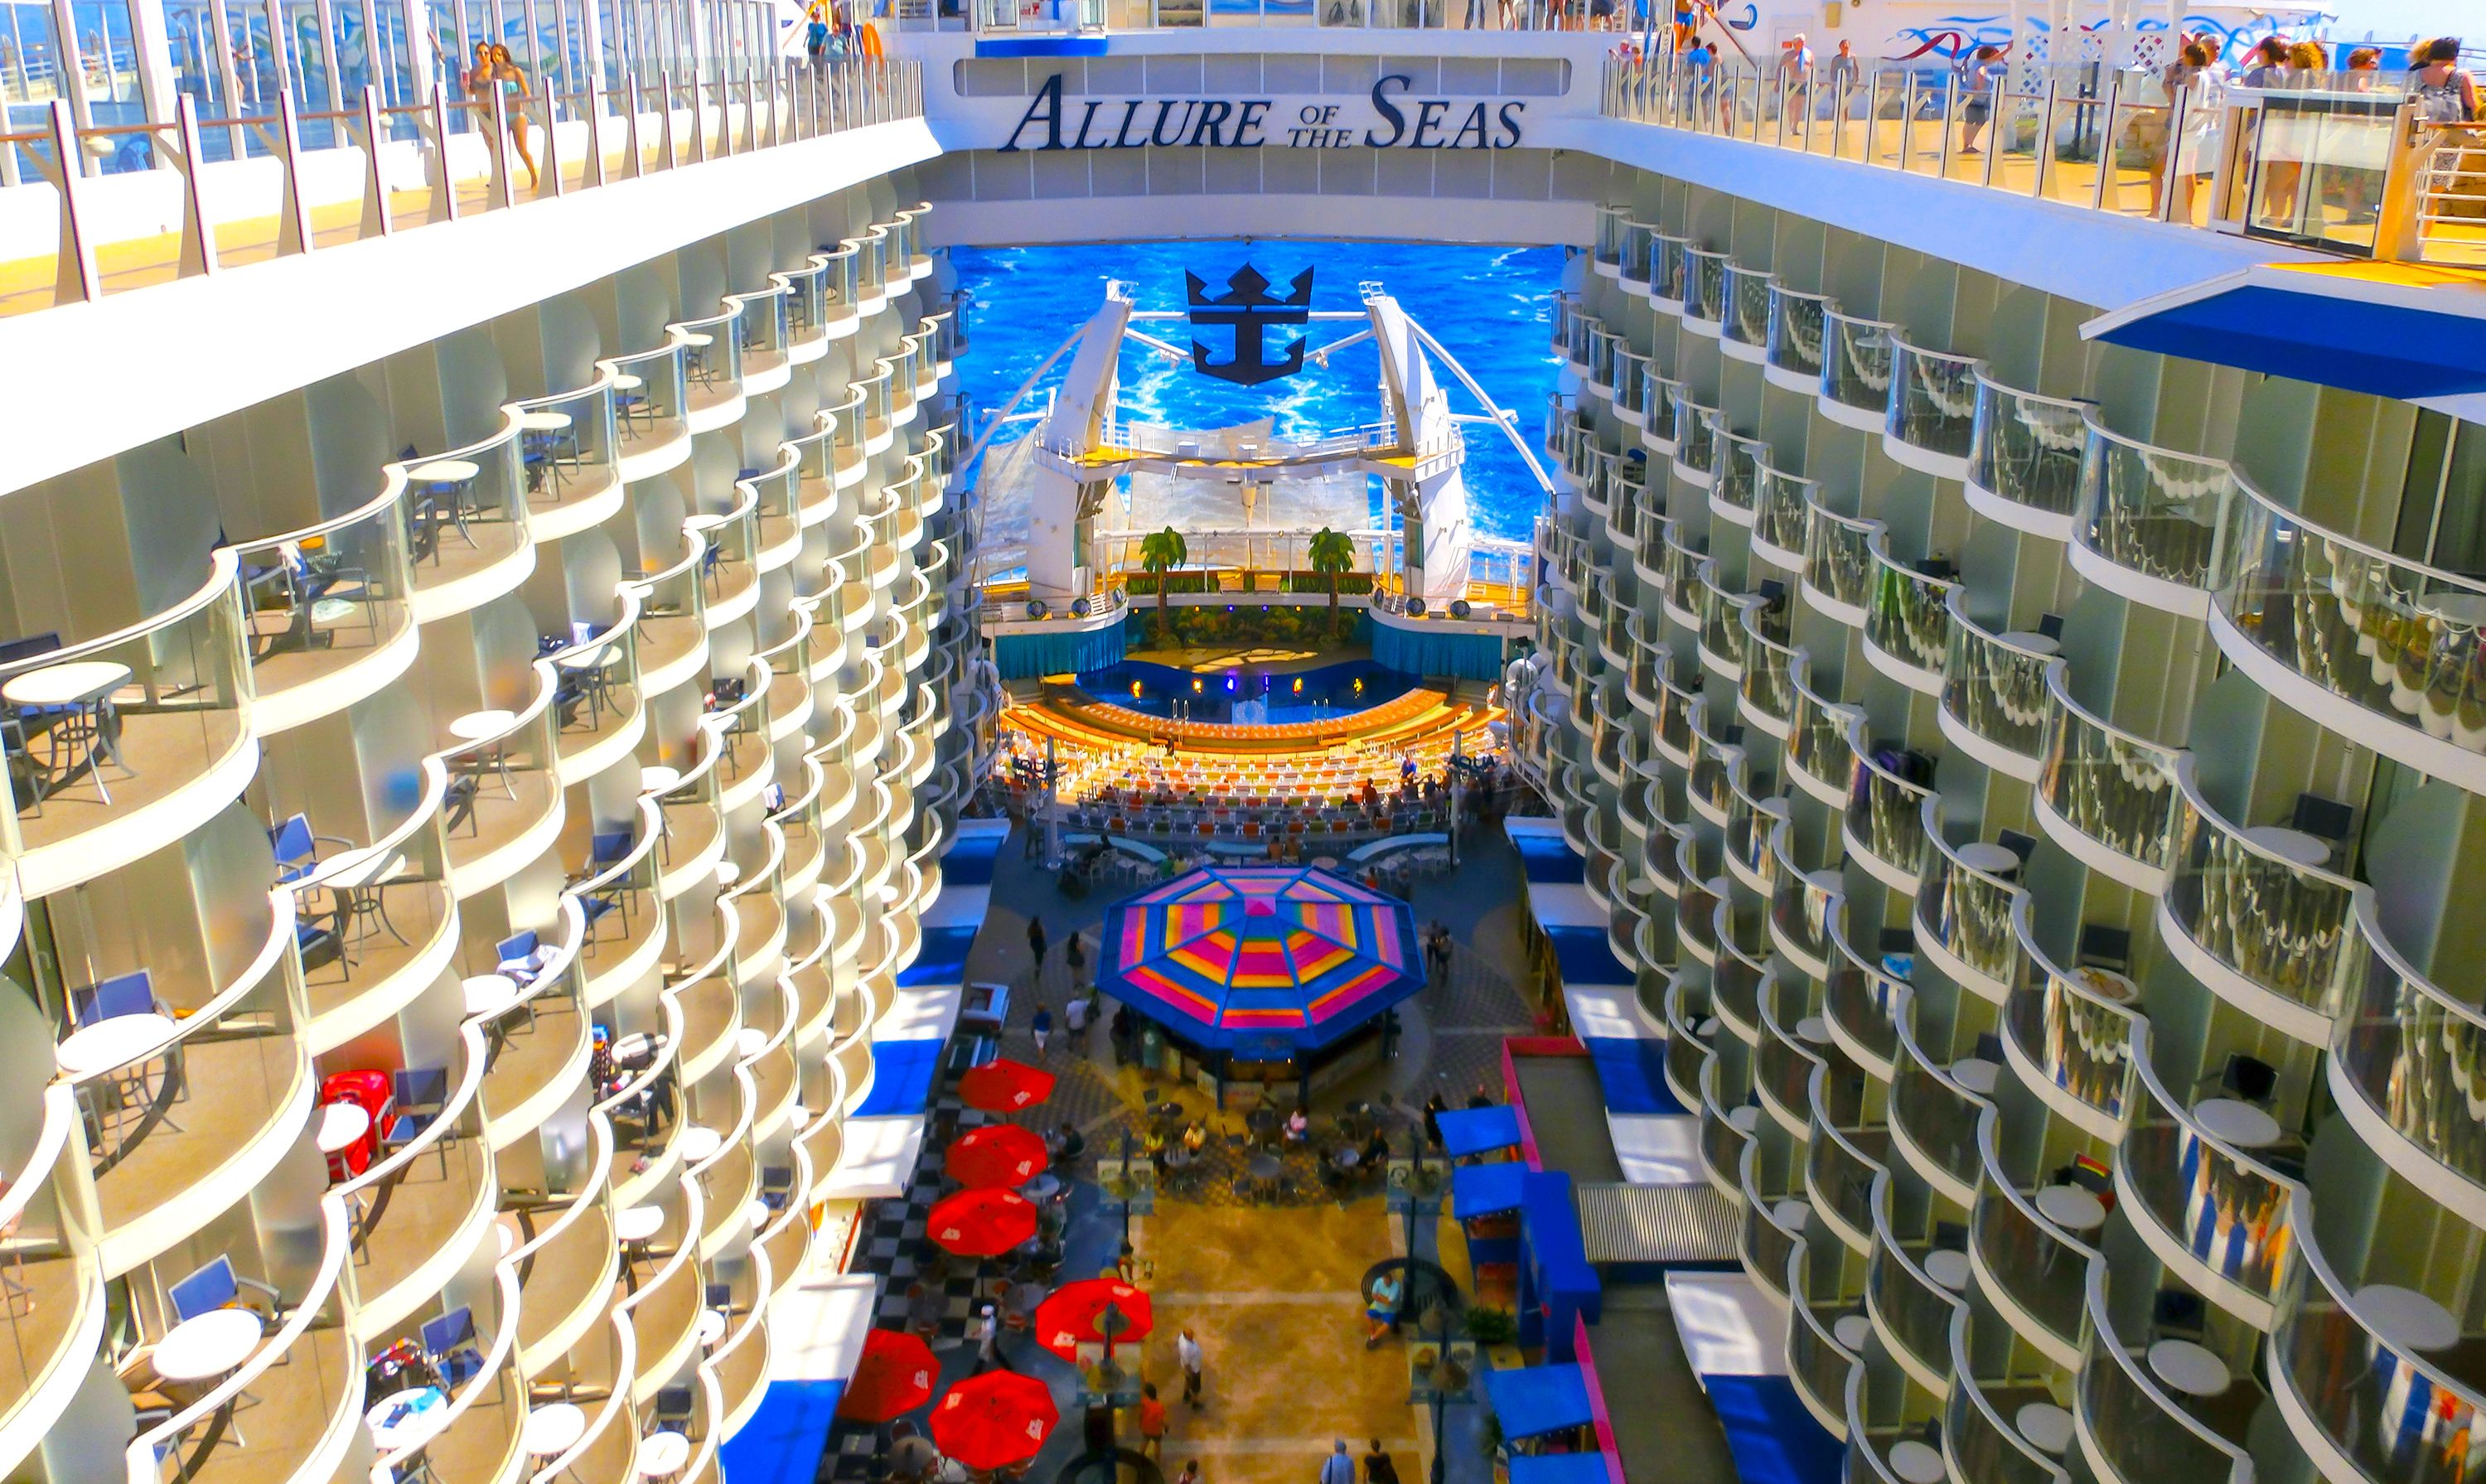 upper deck on the allure of the seas cruise ship